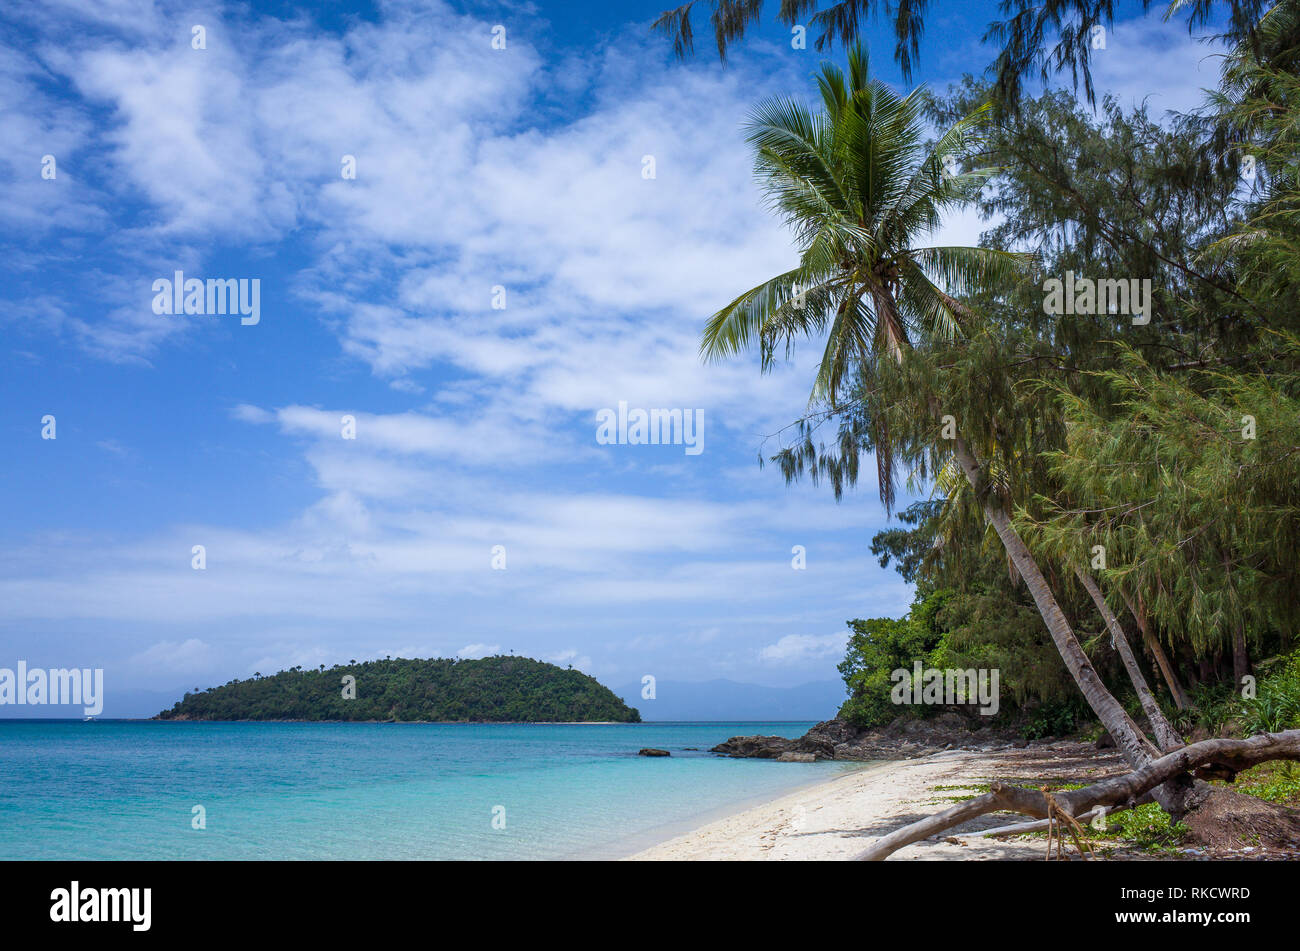 Perfect tiny island in turquoise sea, with palm trees and rugged Bonbon Beach, Romblon - Philippines Stock Photo